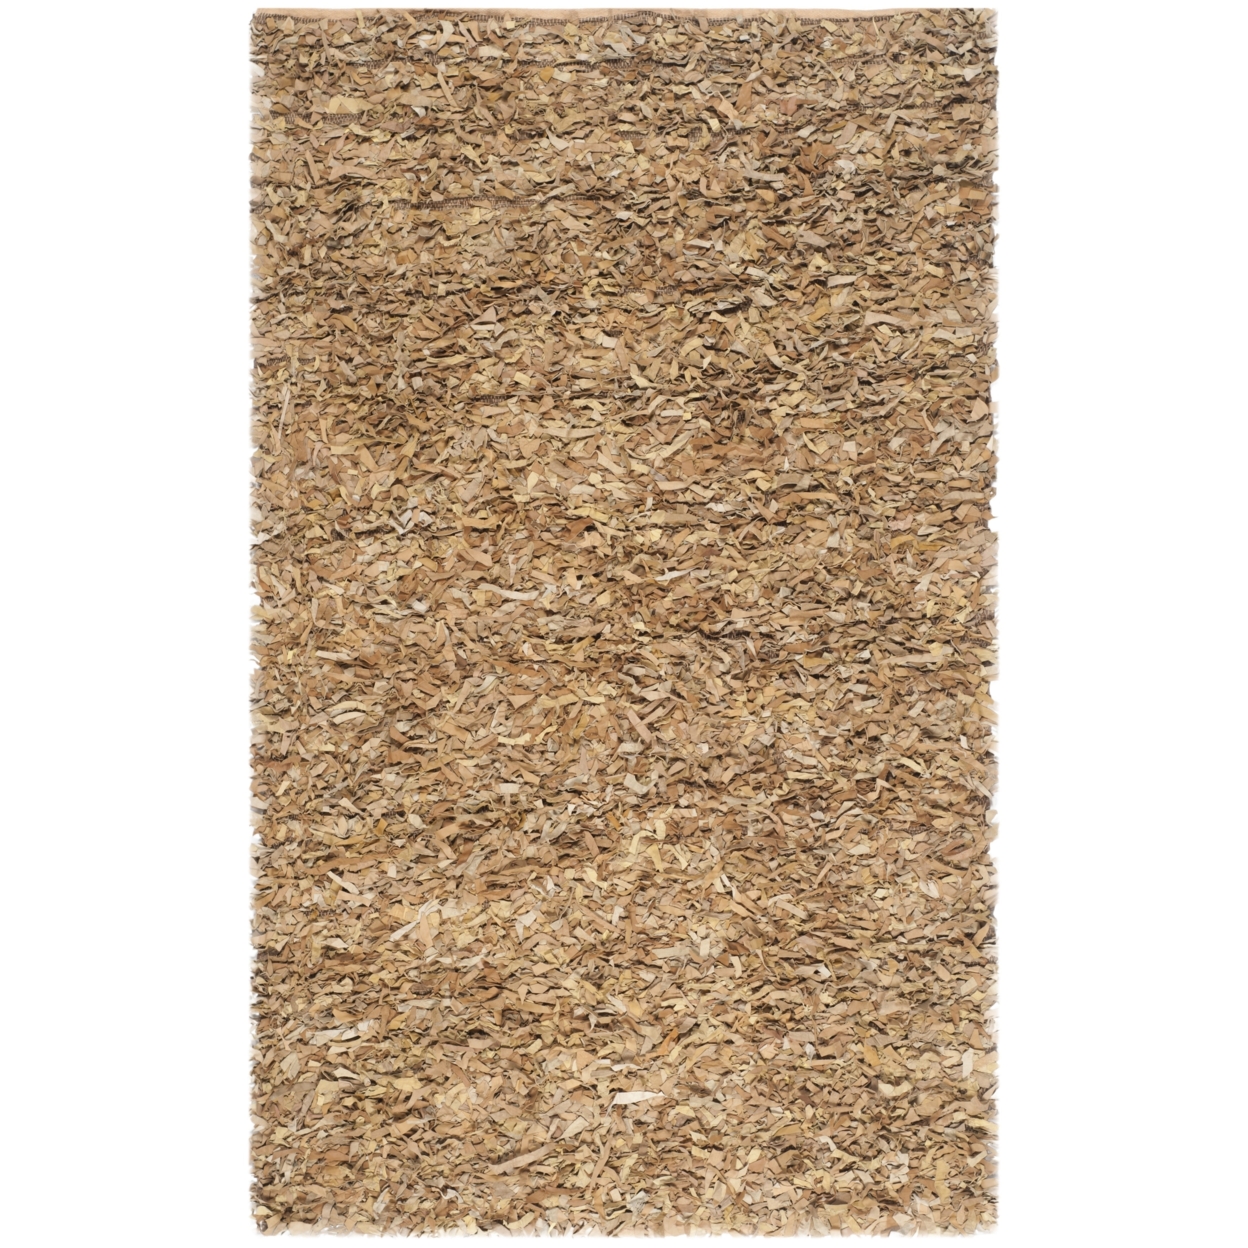 SAFAVIEH Leather Shag LSG511G Hand-knotted Light Gold Rug - 6' X 9'